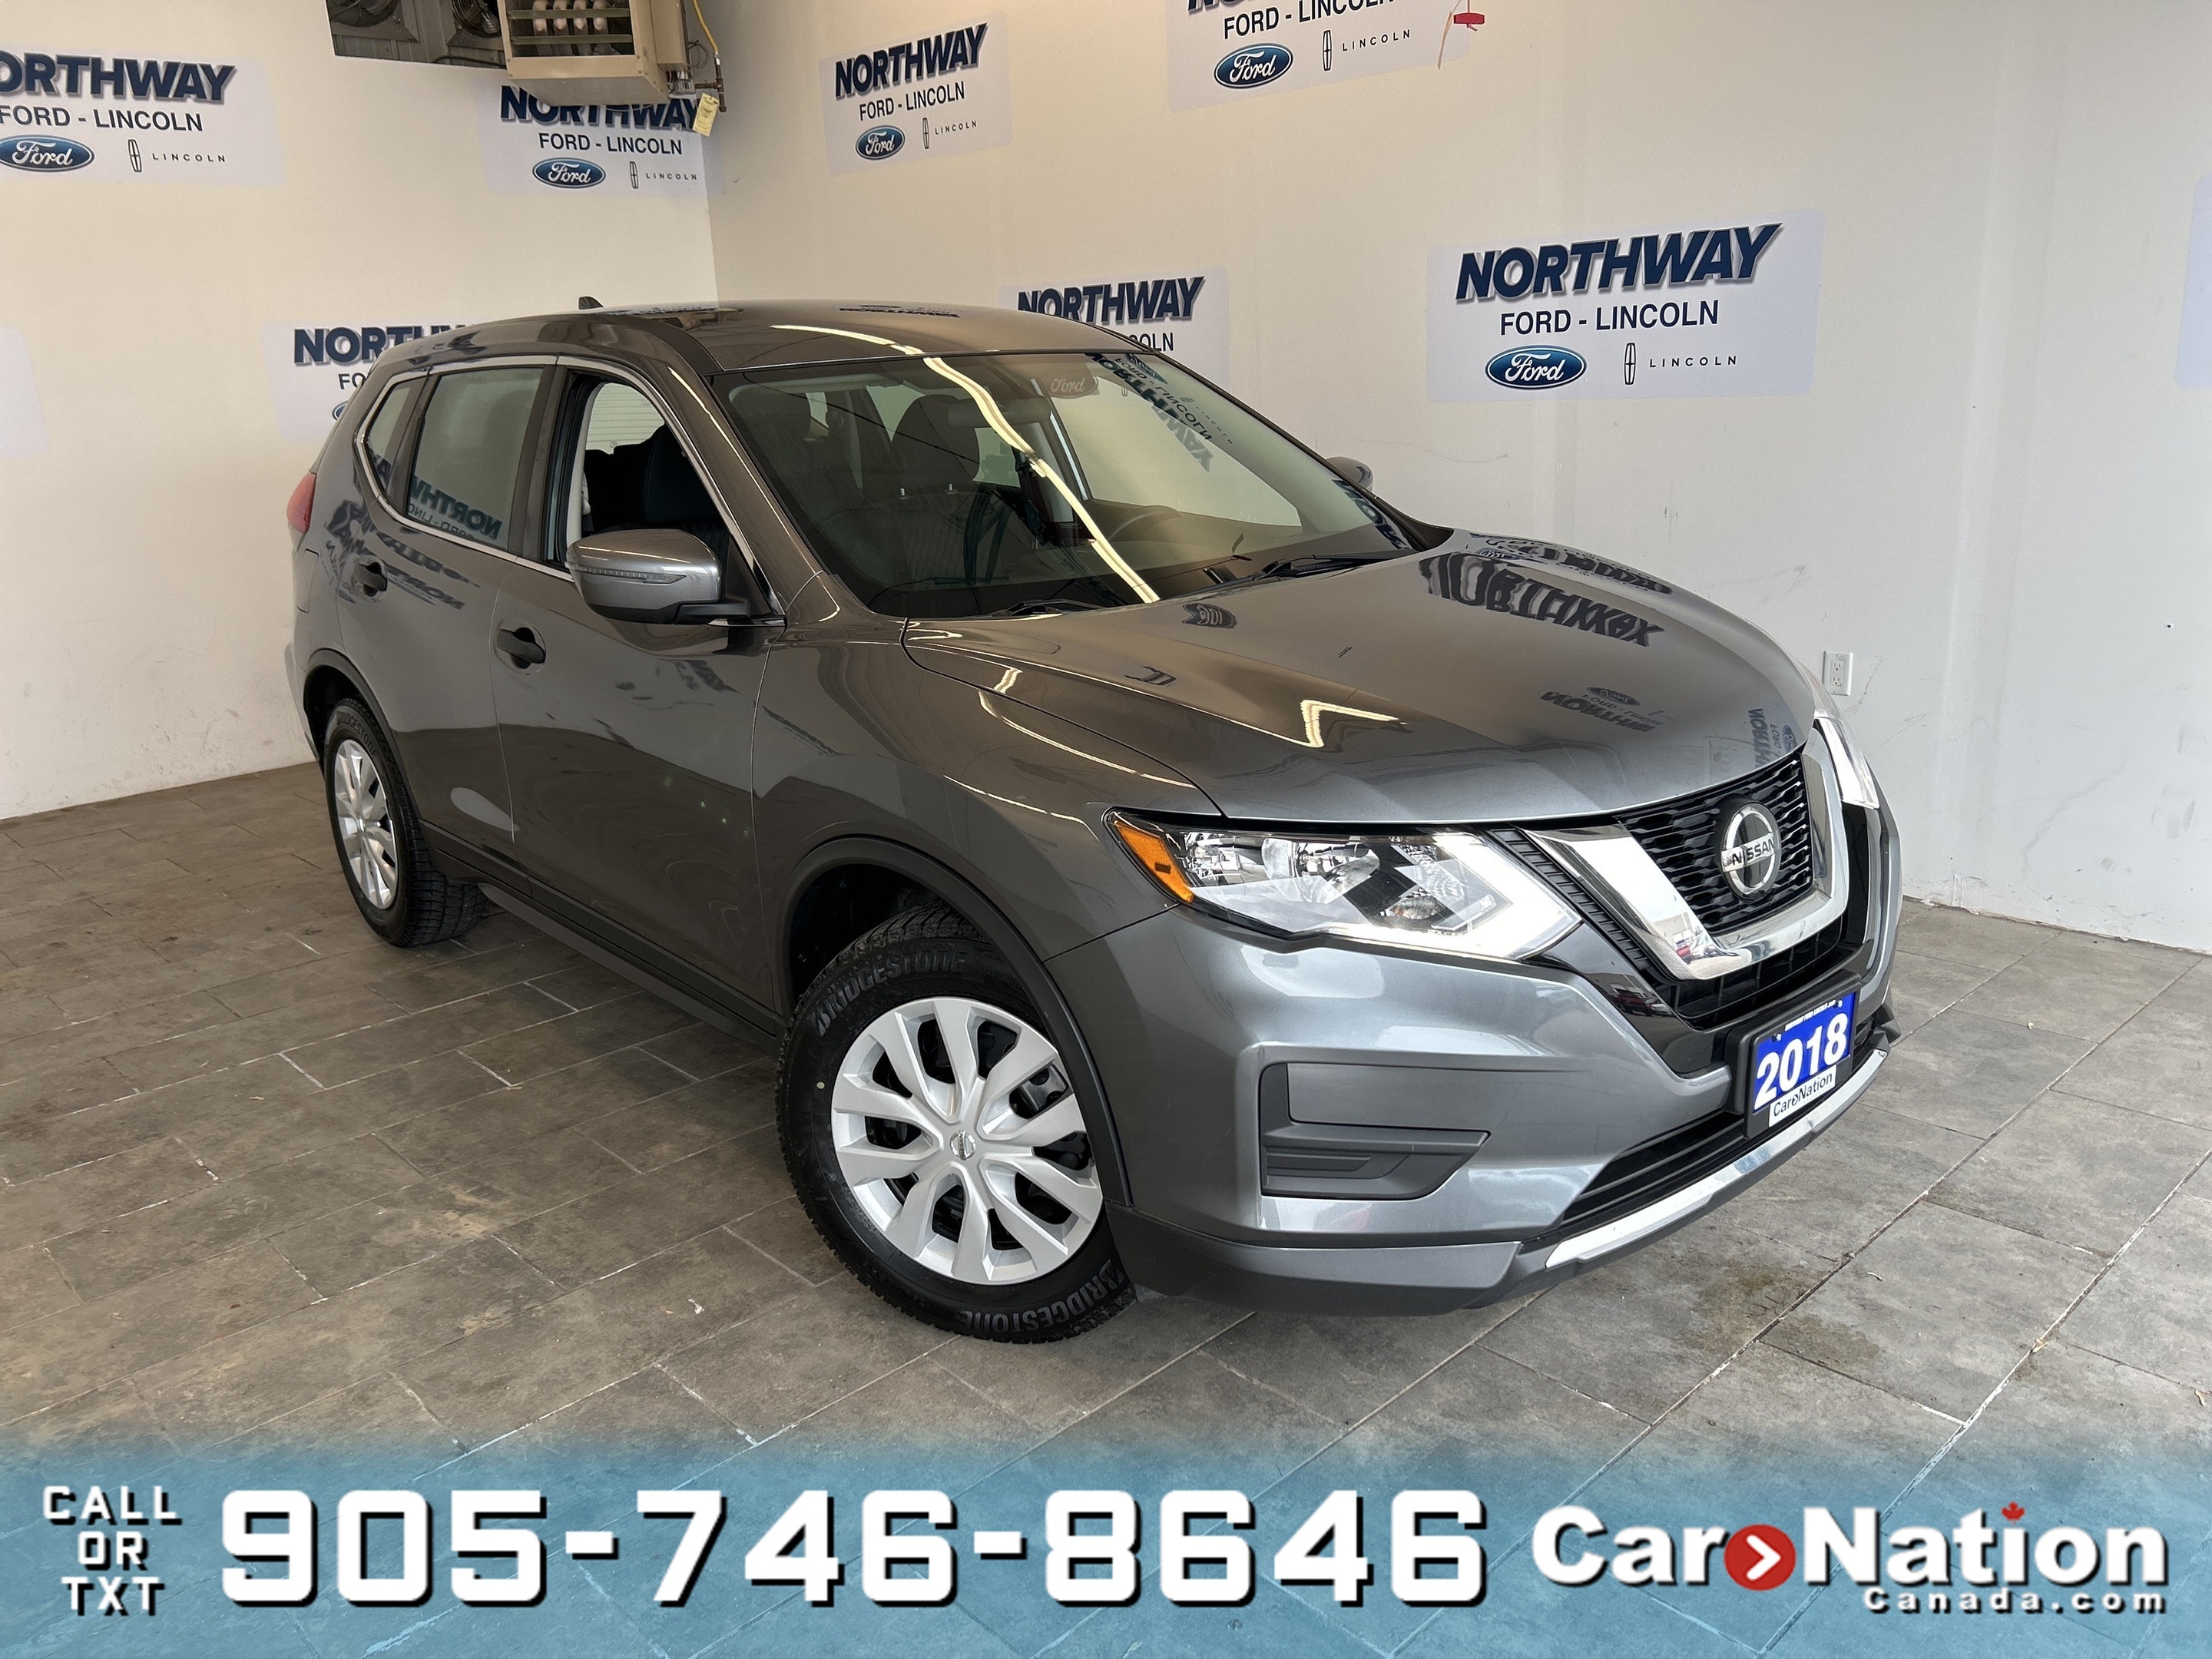 2018 Nissan Rogue TOUCHSCREEN | REAR CAM | WE WANT YOUR TRADE! 